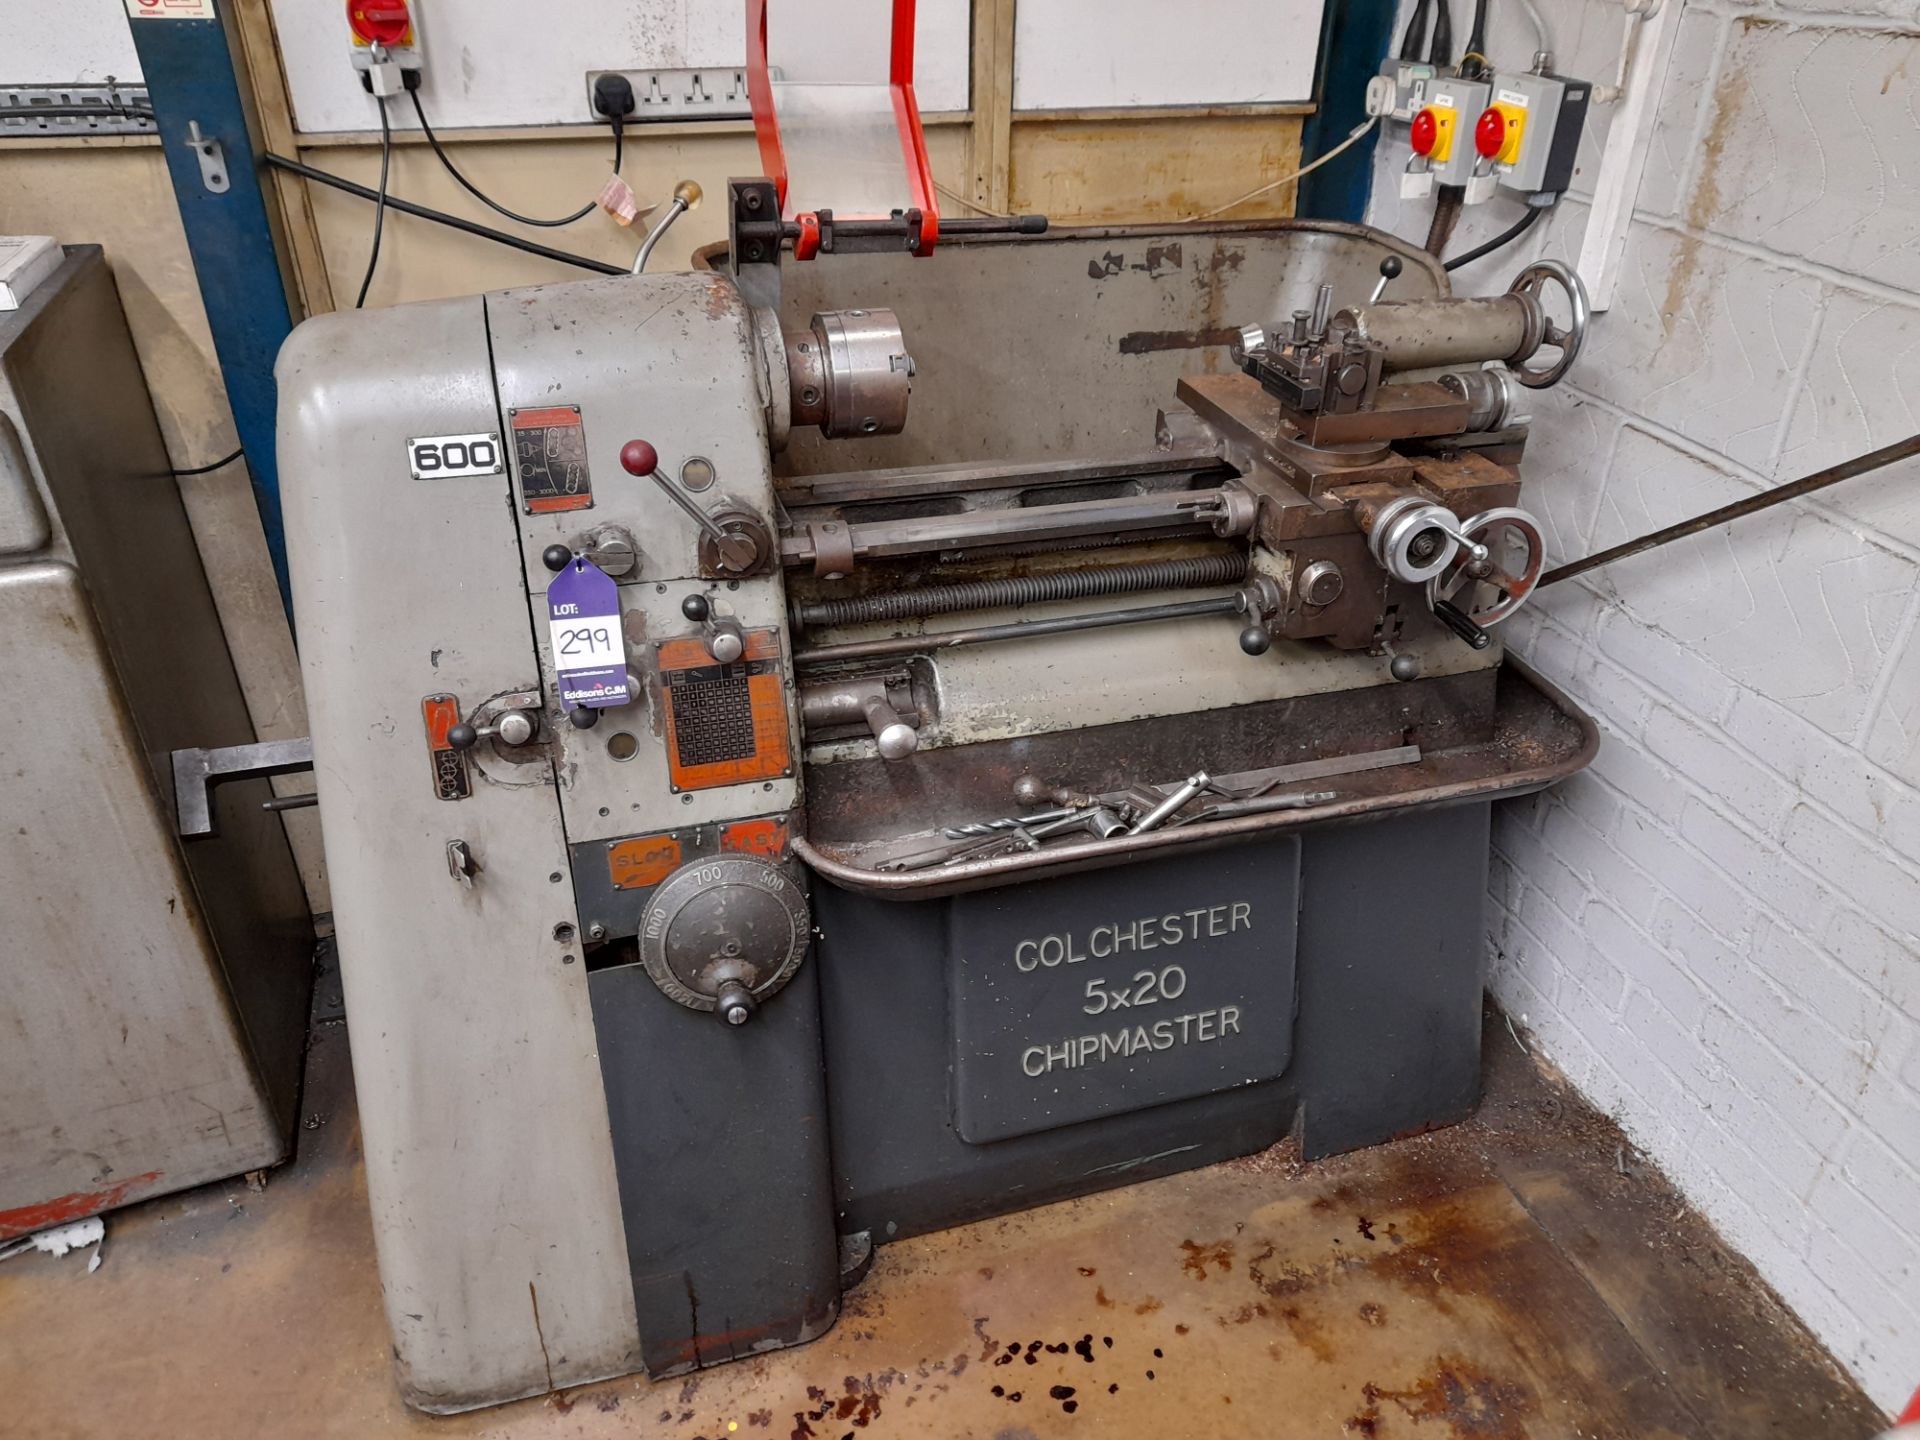 Colchester 5x20 chipmaster lathe, with Pinder Versatool cabinet and contents, to include various lat